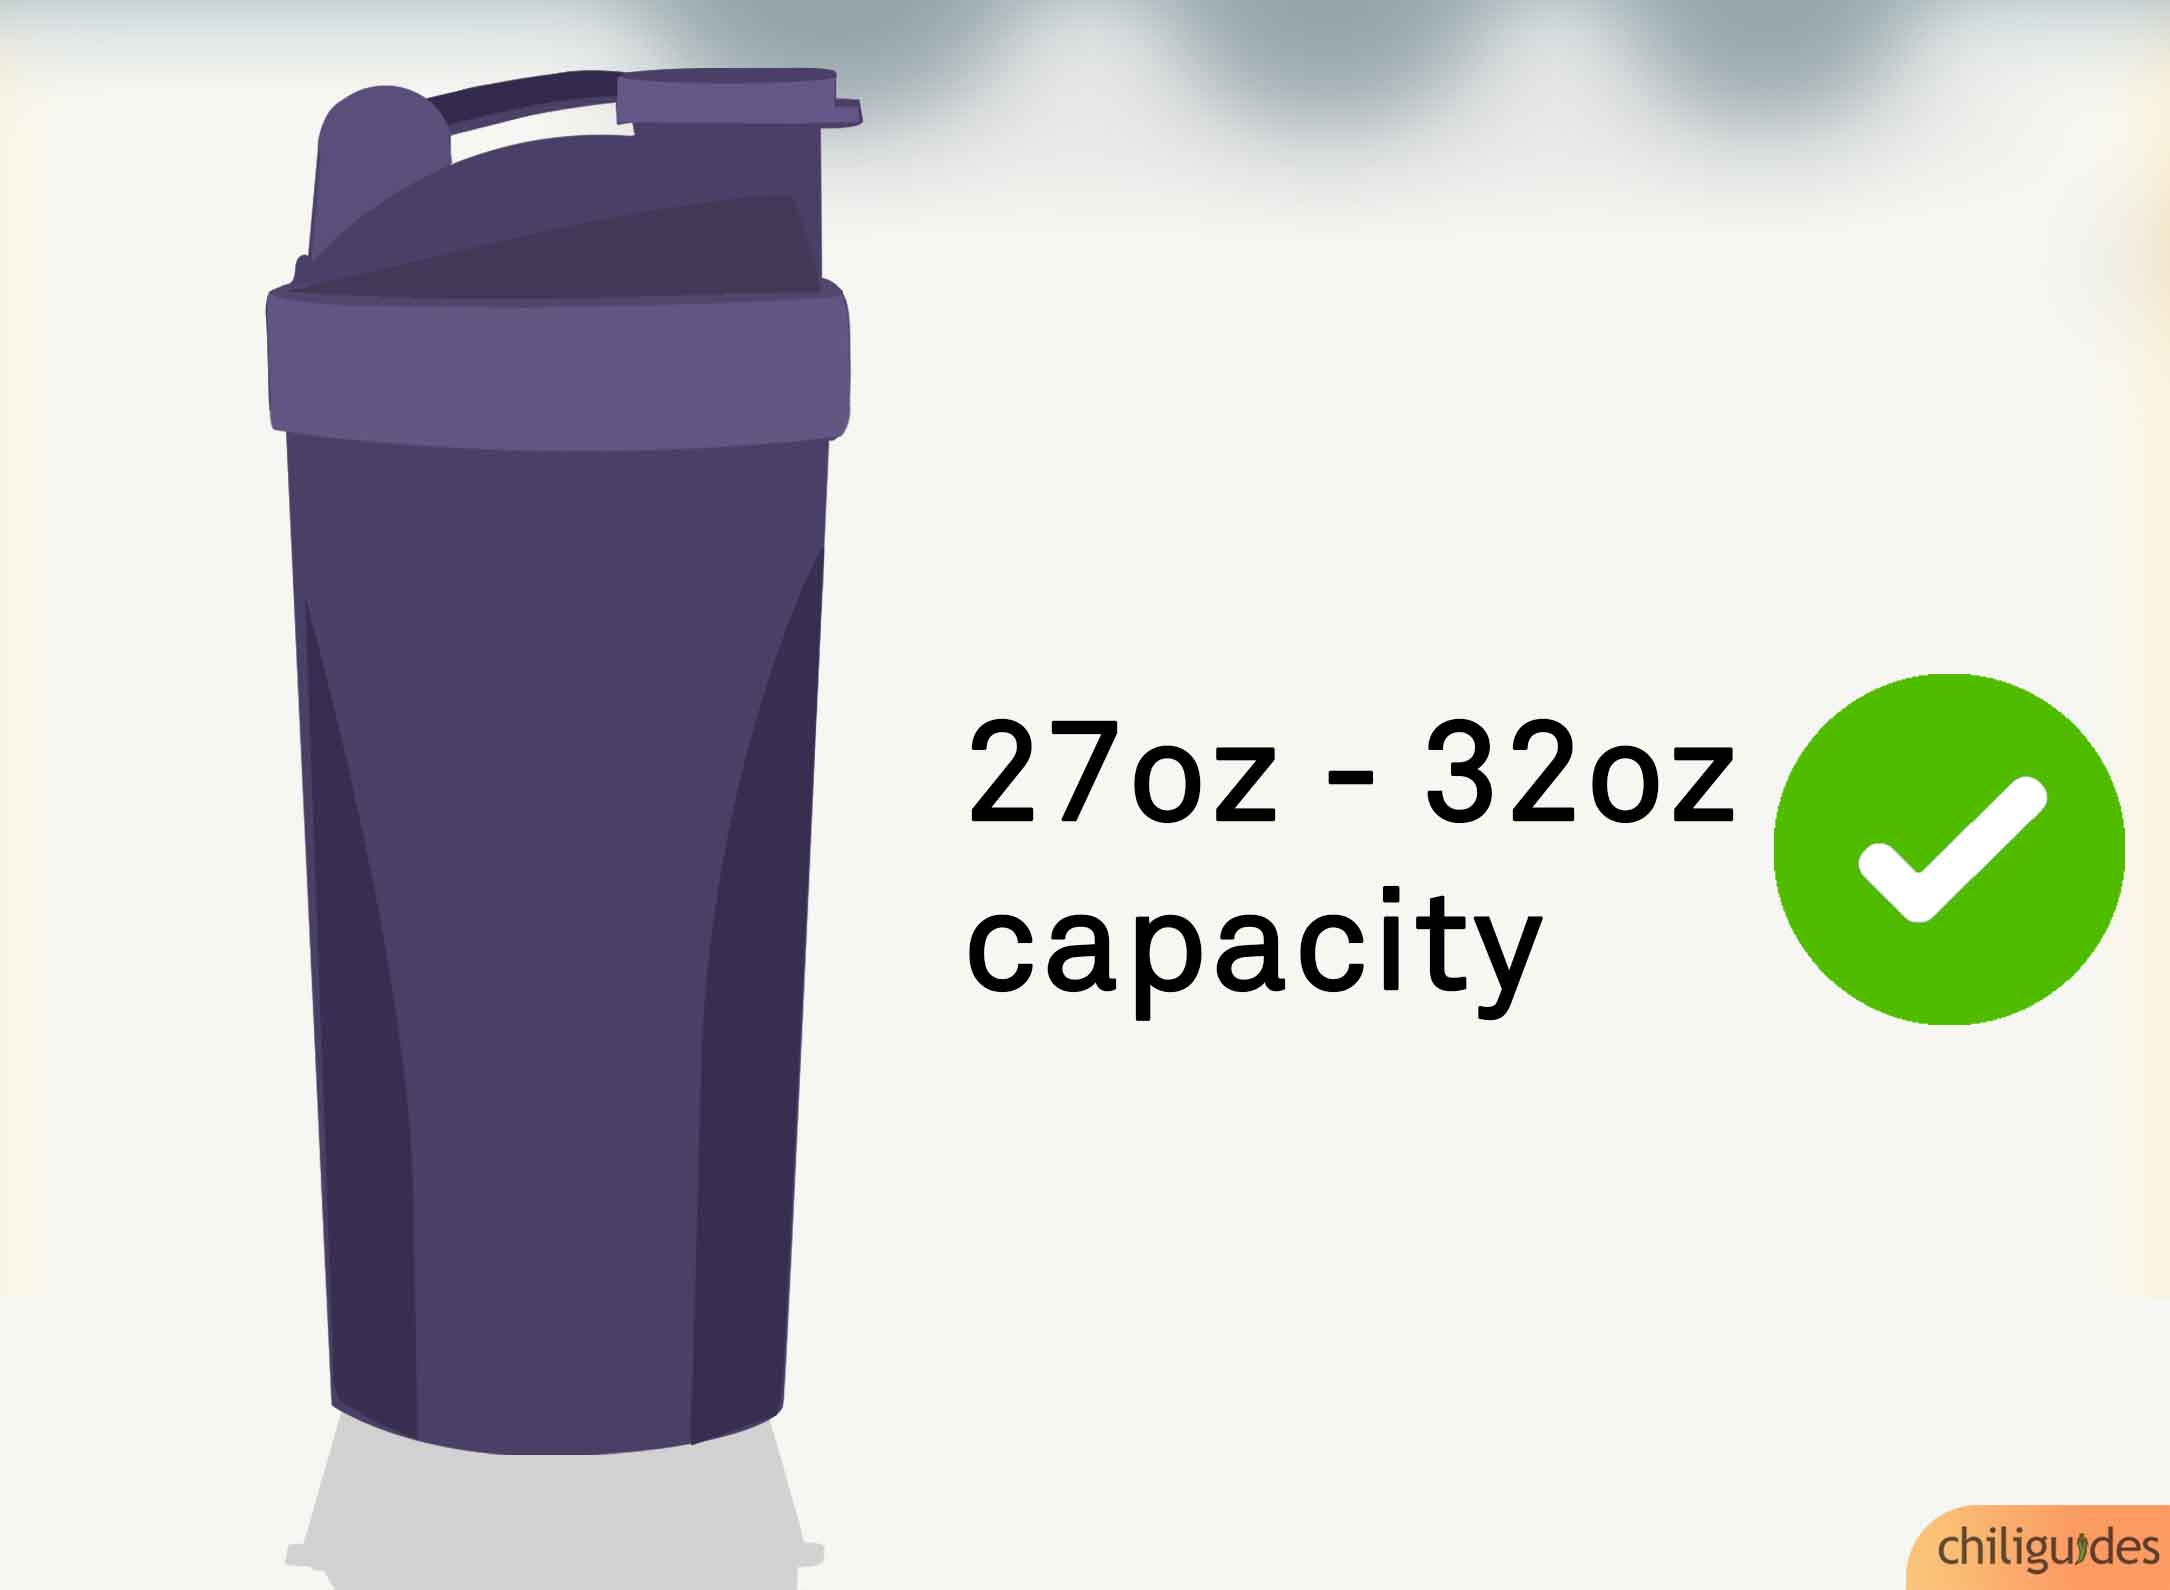 A 27oz – 32oz shaker is usually a safe bet.